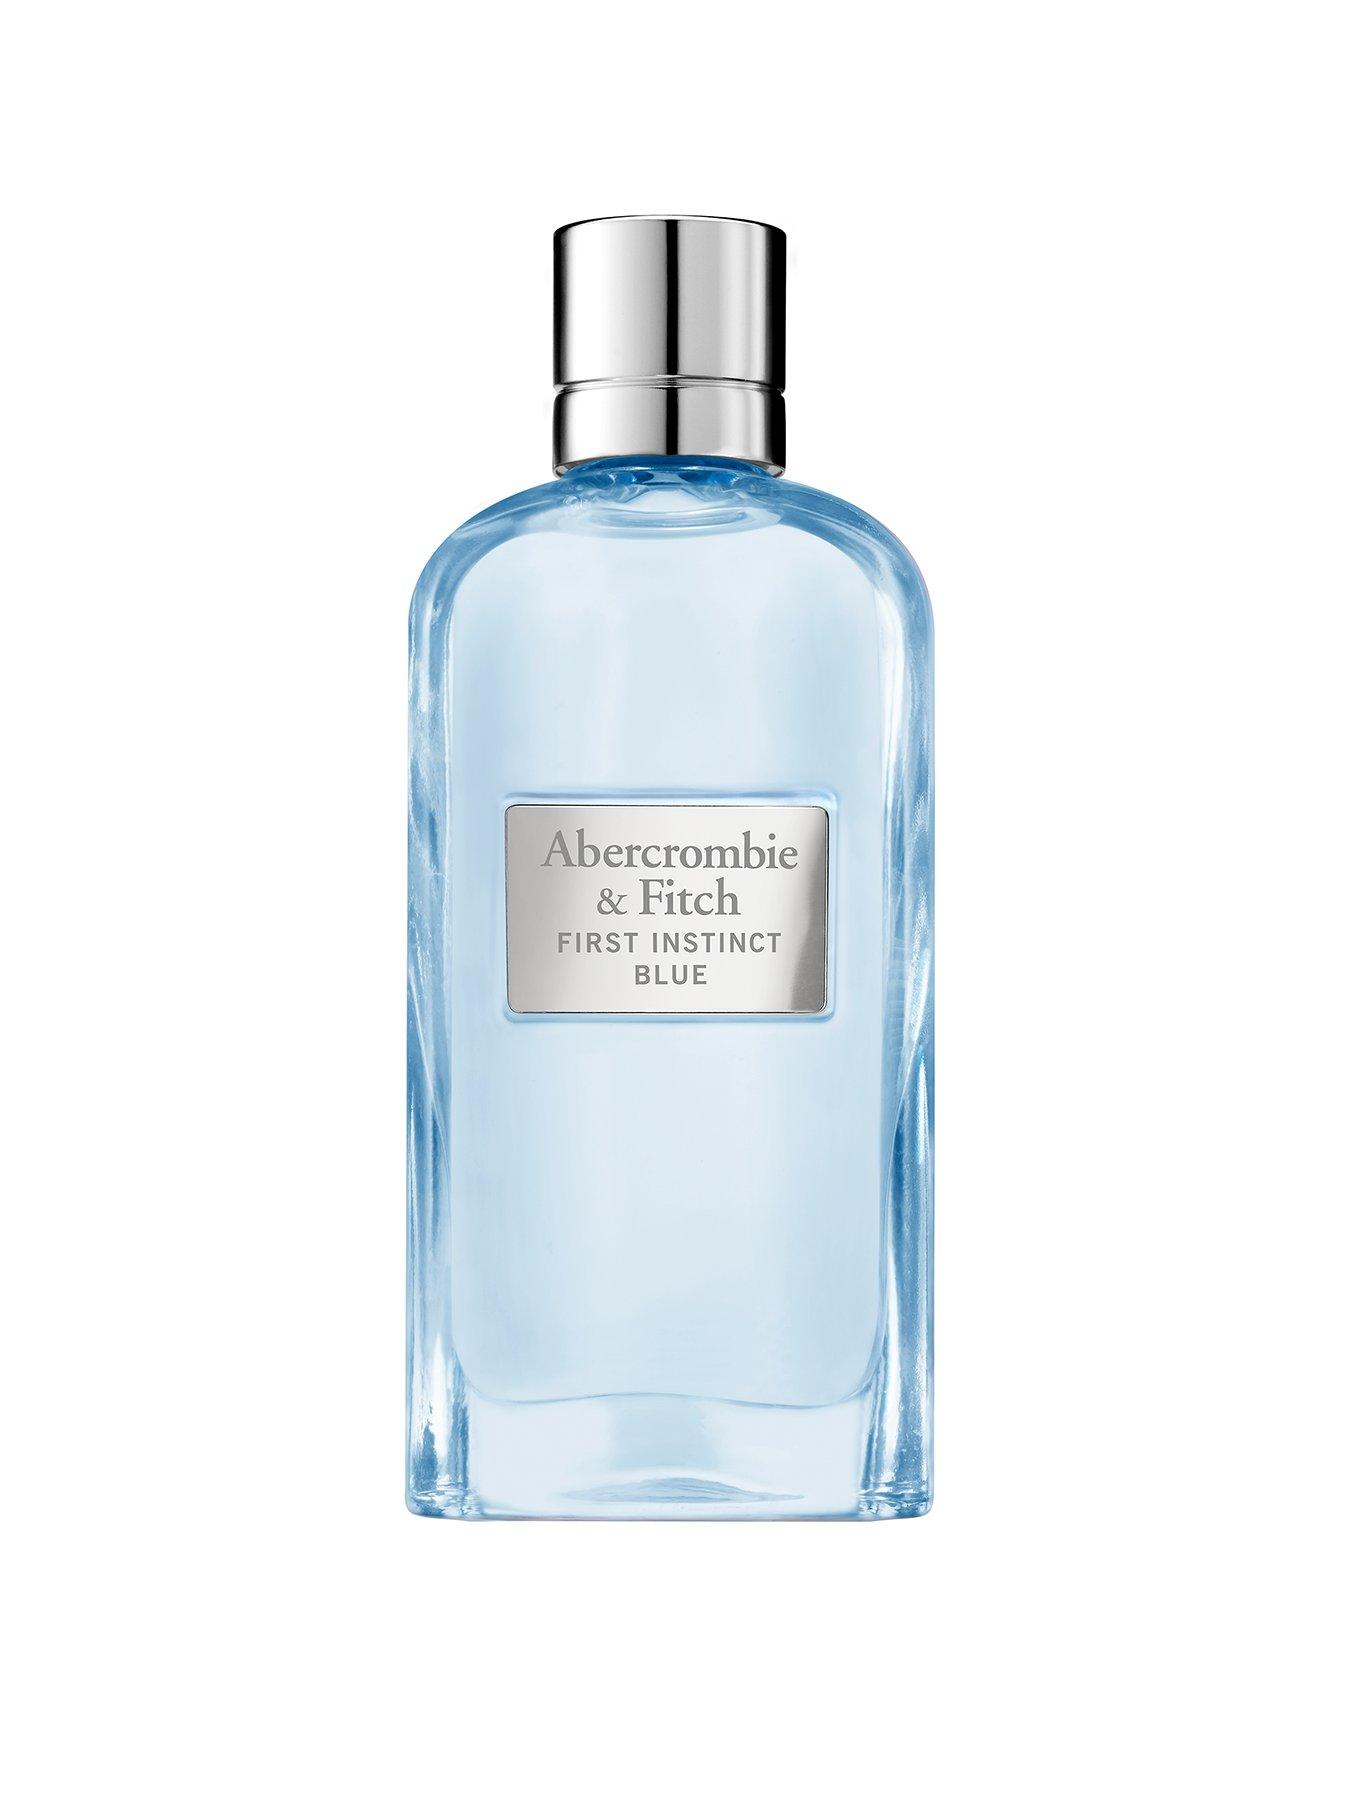 abercrombie and fitch 100ml